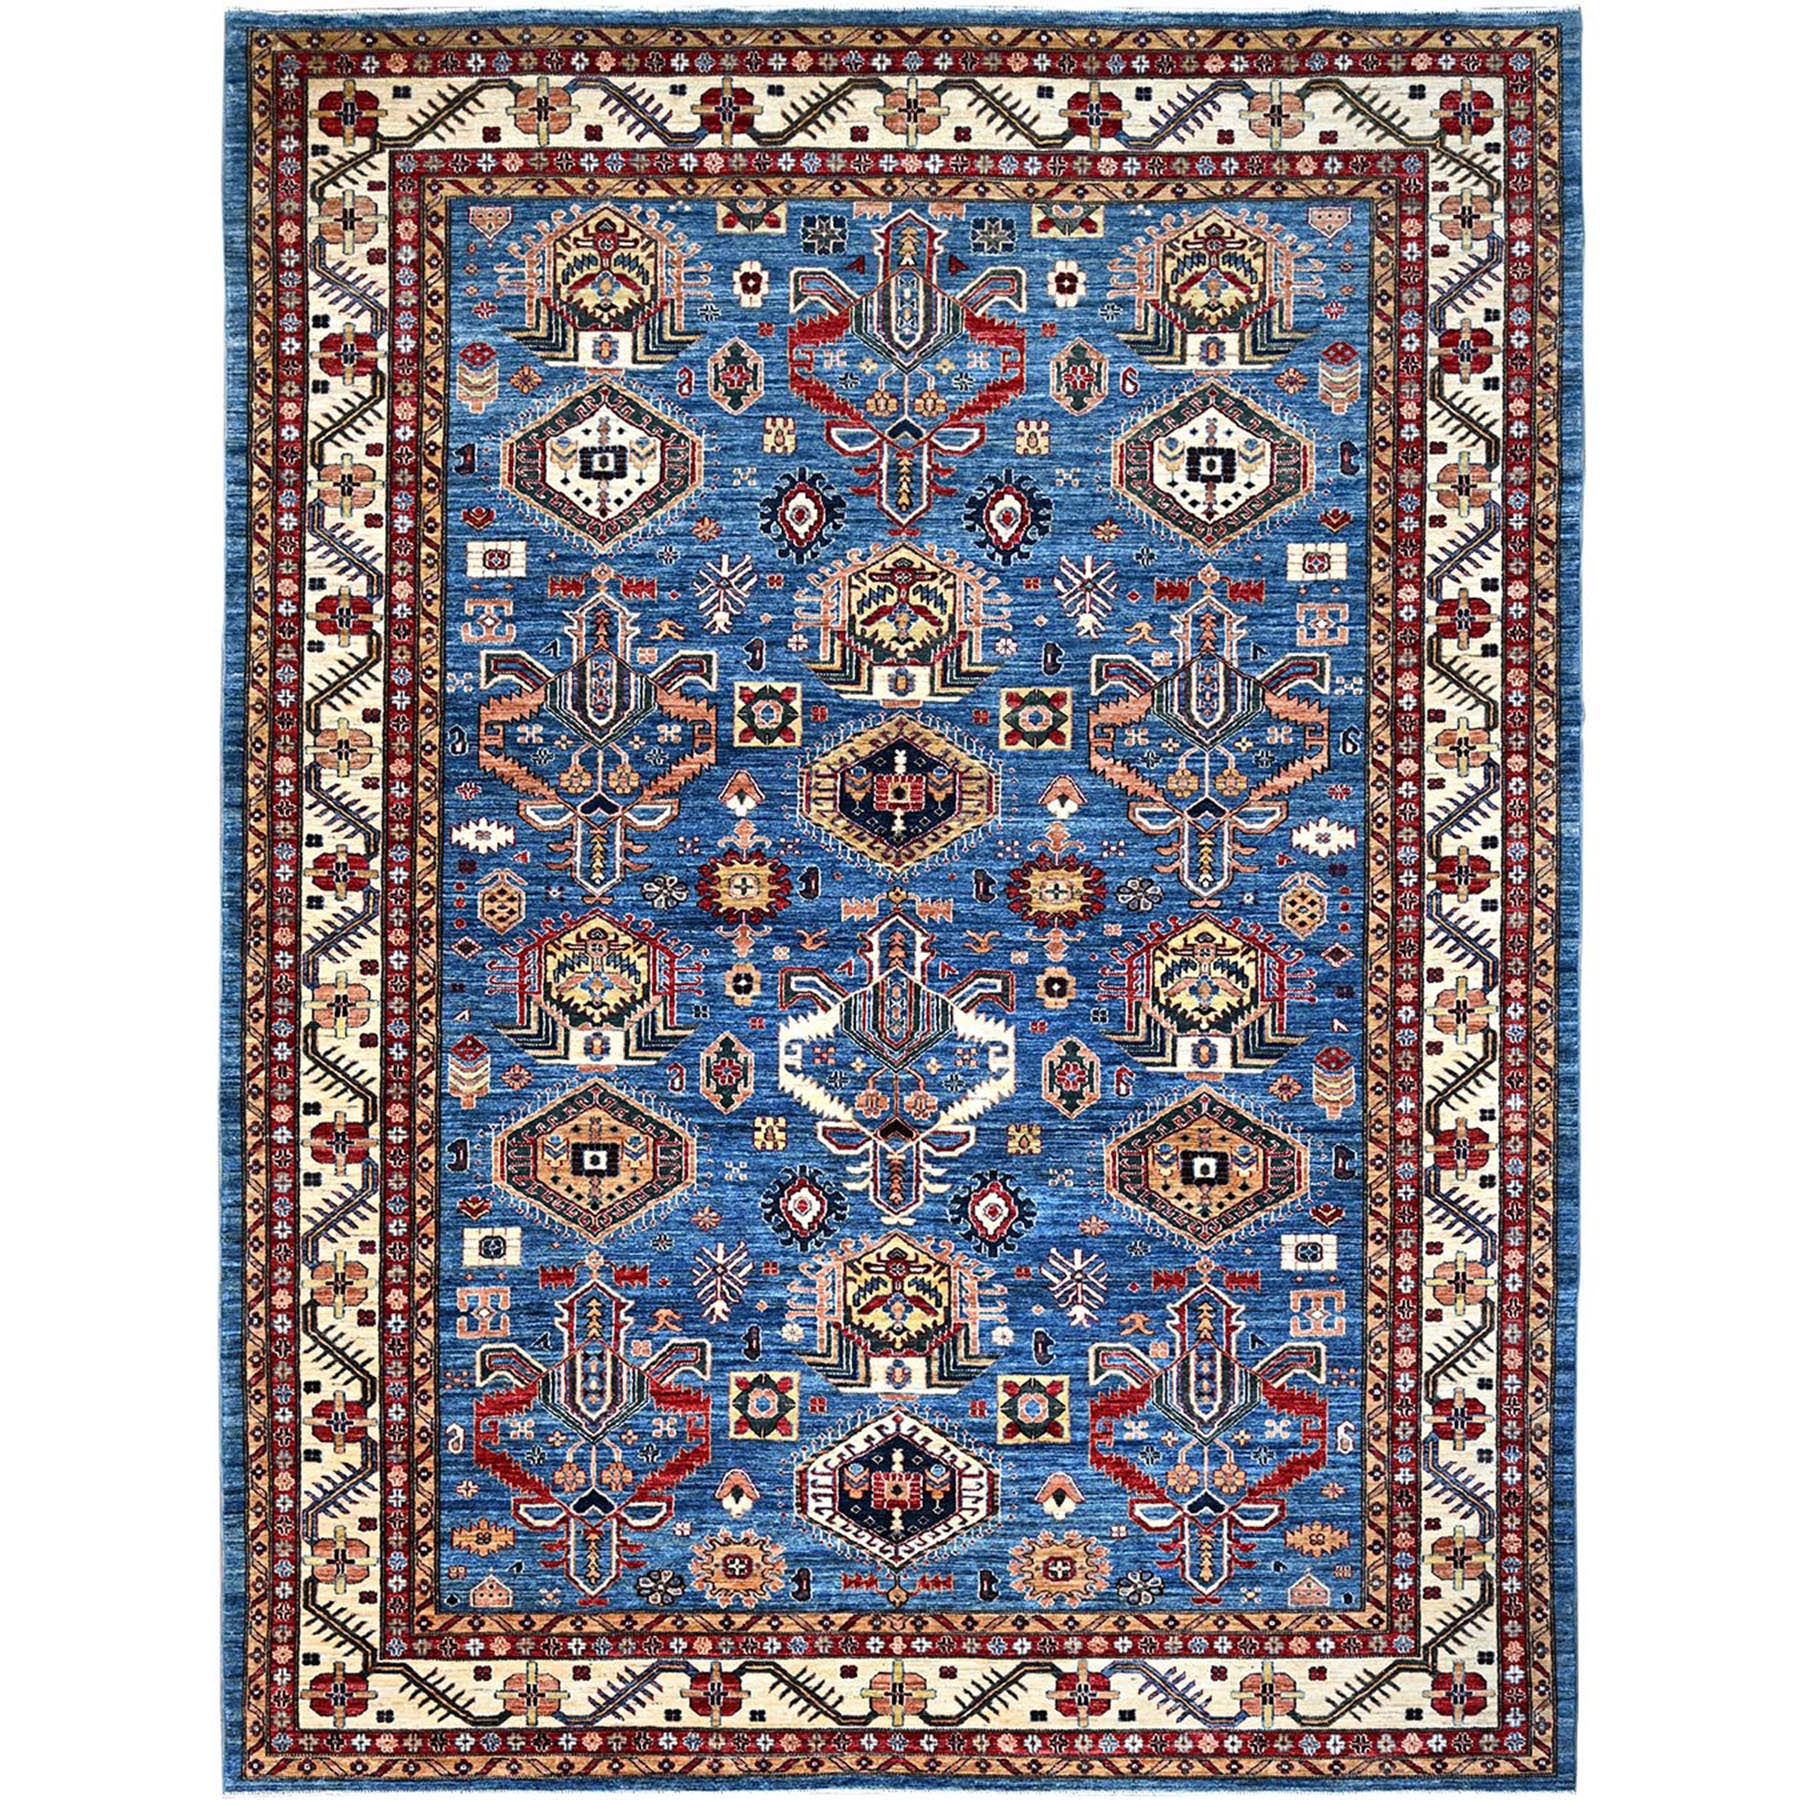 Campanula Blue and Ballet White Border, Shiny and Vibrant Wool, Vegetable Dyes, Afghan Super Kazak with All Over Medallions, Hand Knotted, Denser Weave Oriental Rug 